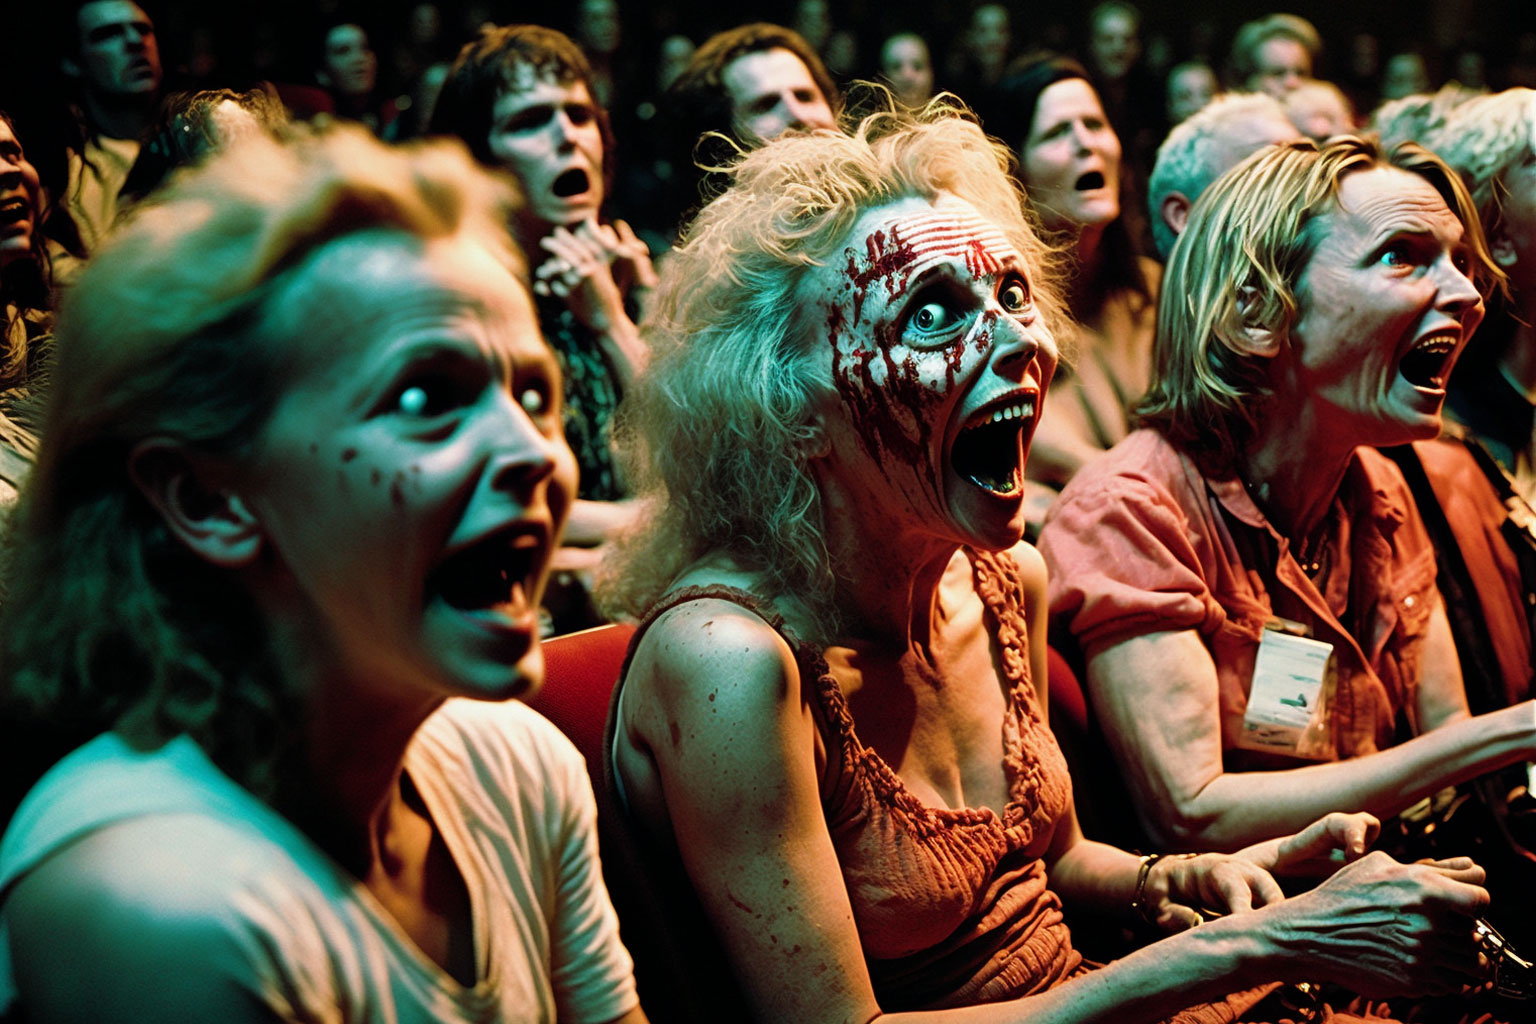 19-Bastopia_Chainsaw-audience-close-up-2